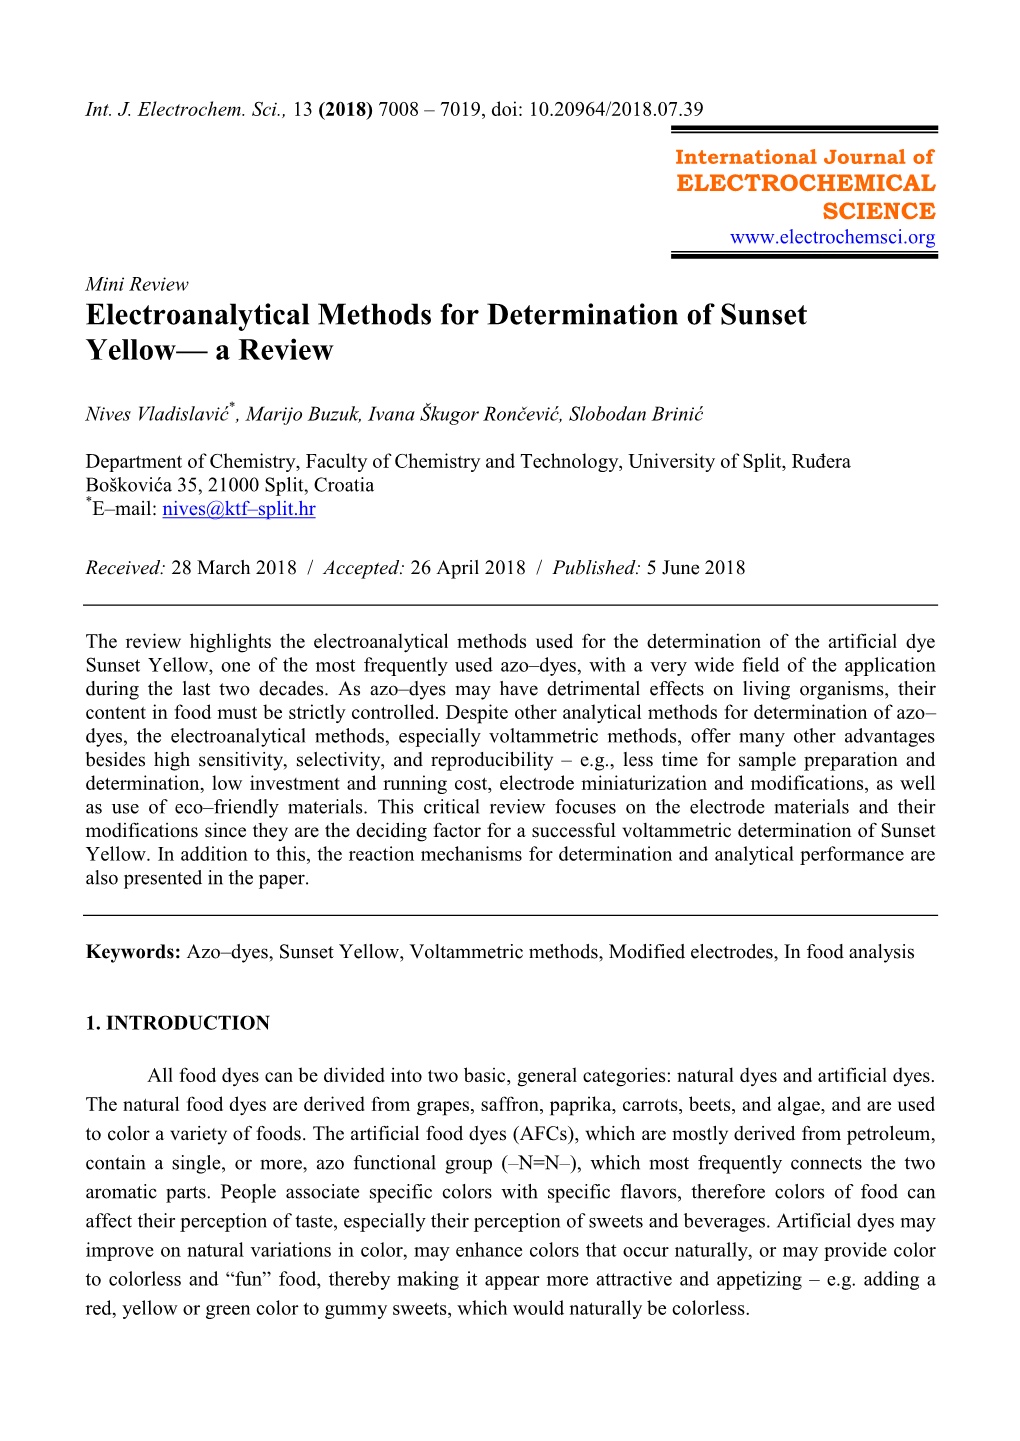 Electroanalytical Methods for Determination of Sunset Yellow— a Review